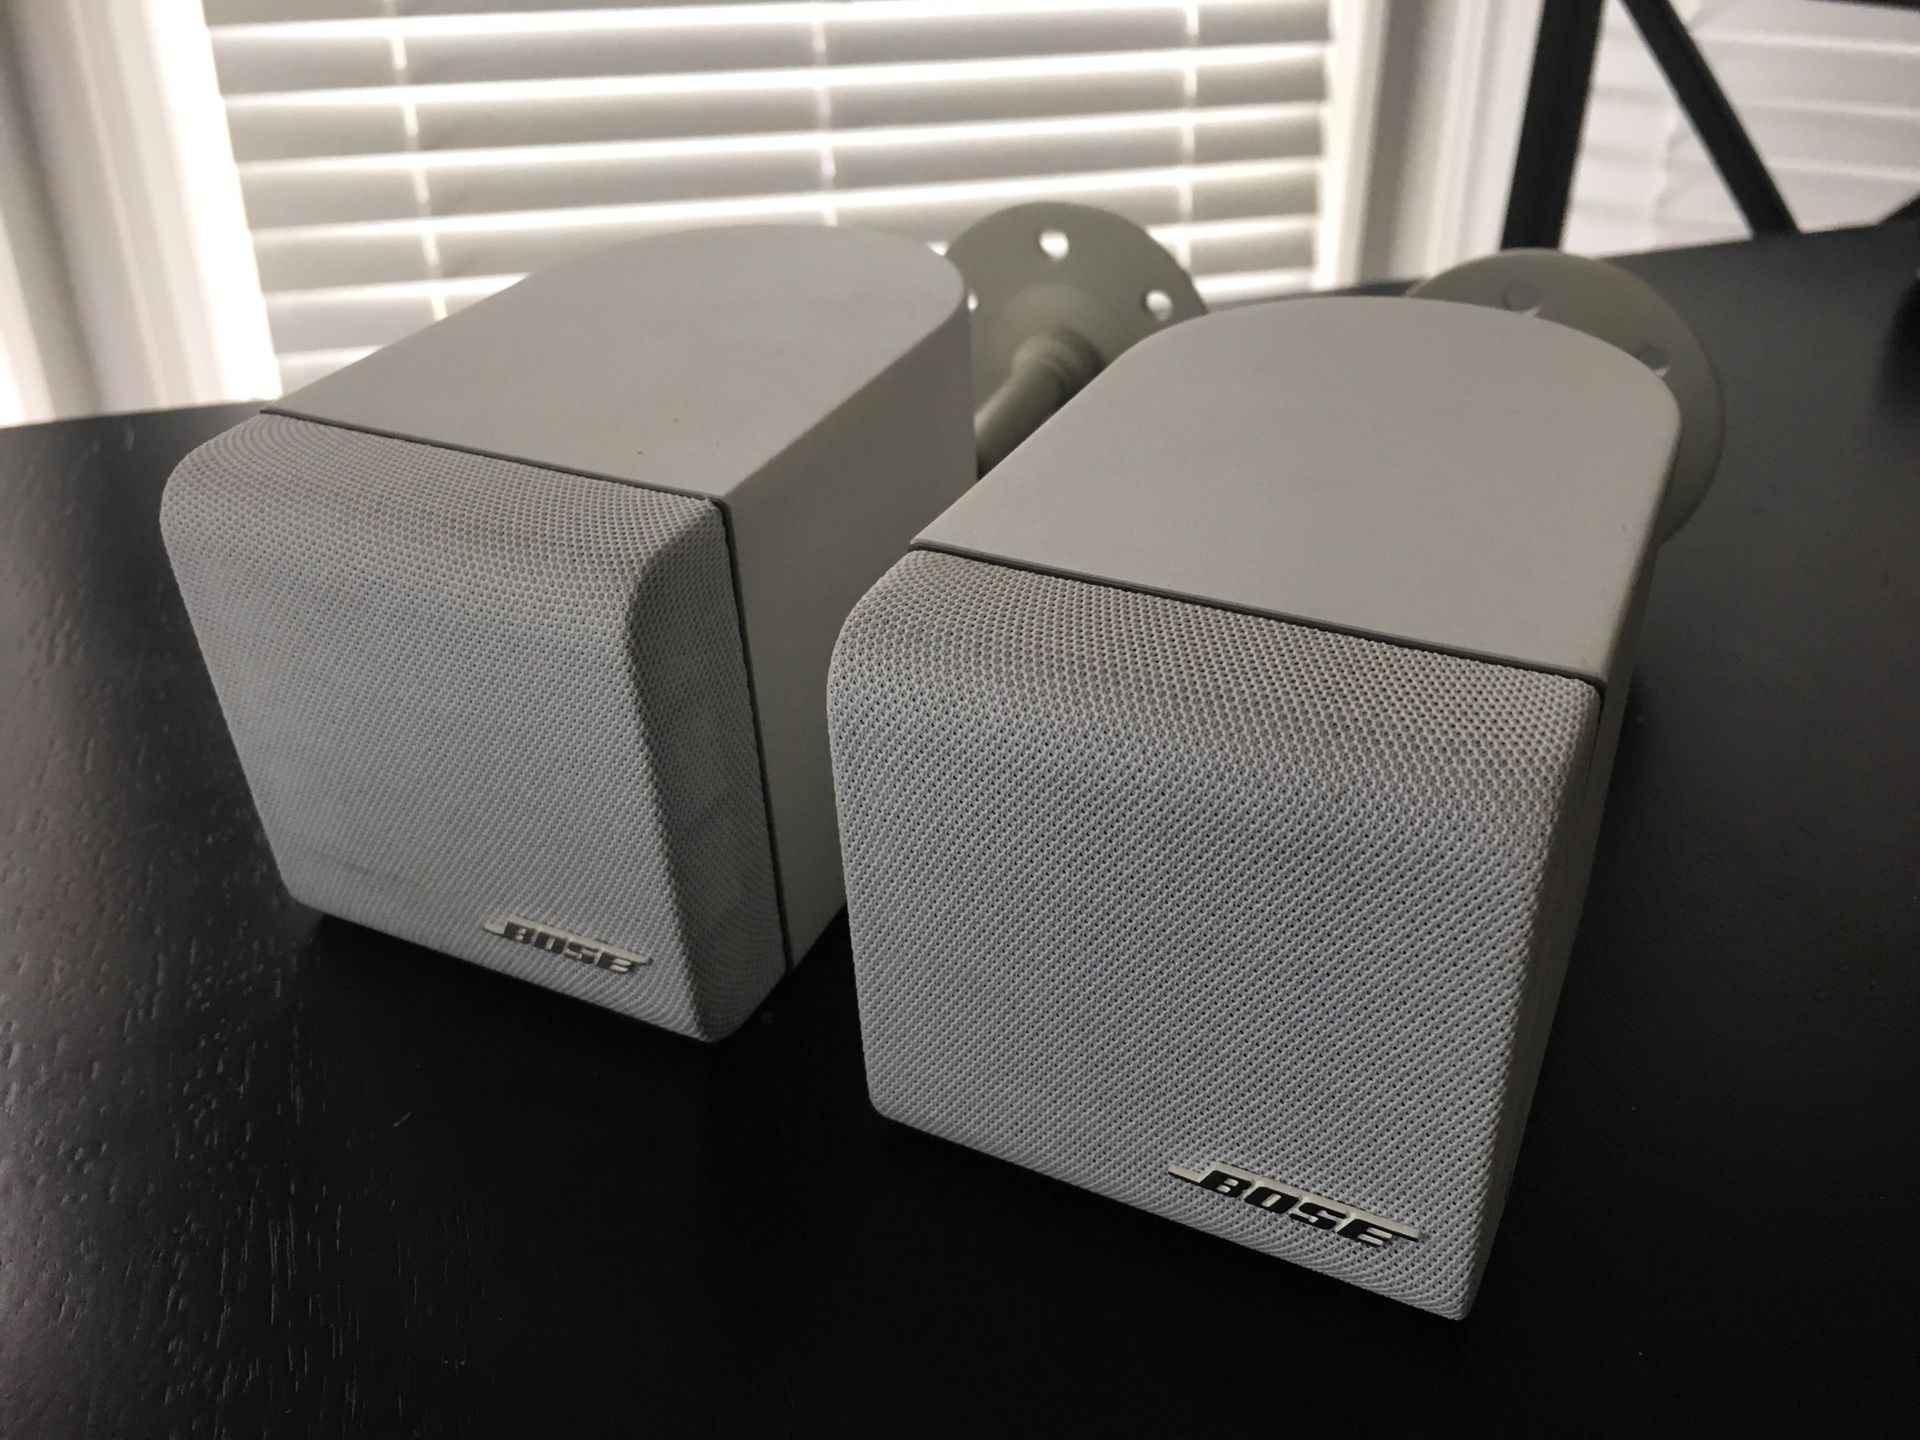 (2) BOSE cube speakers with adjustable mounts